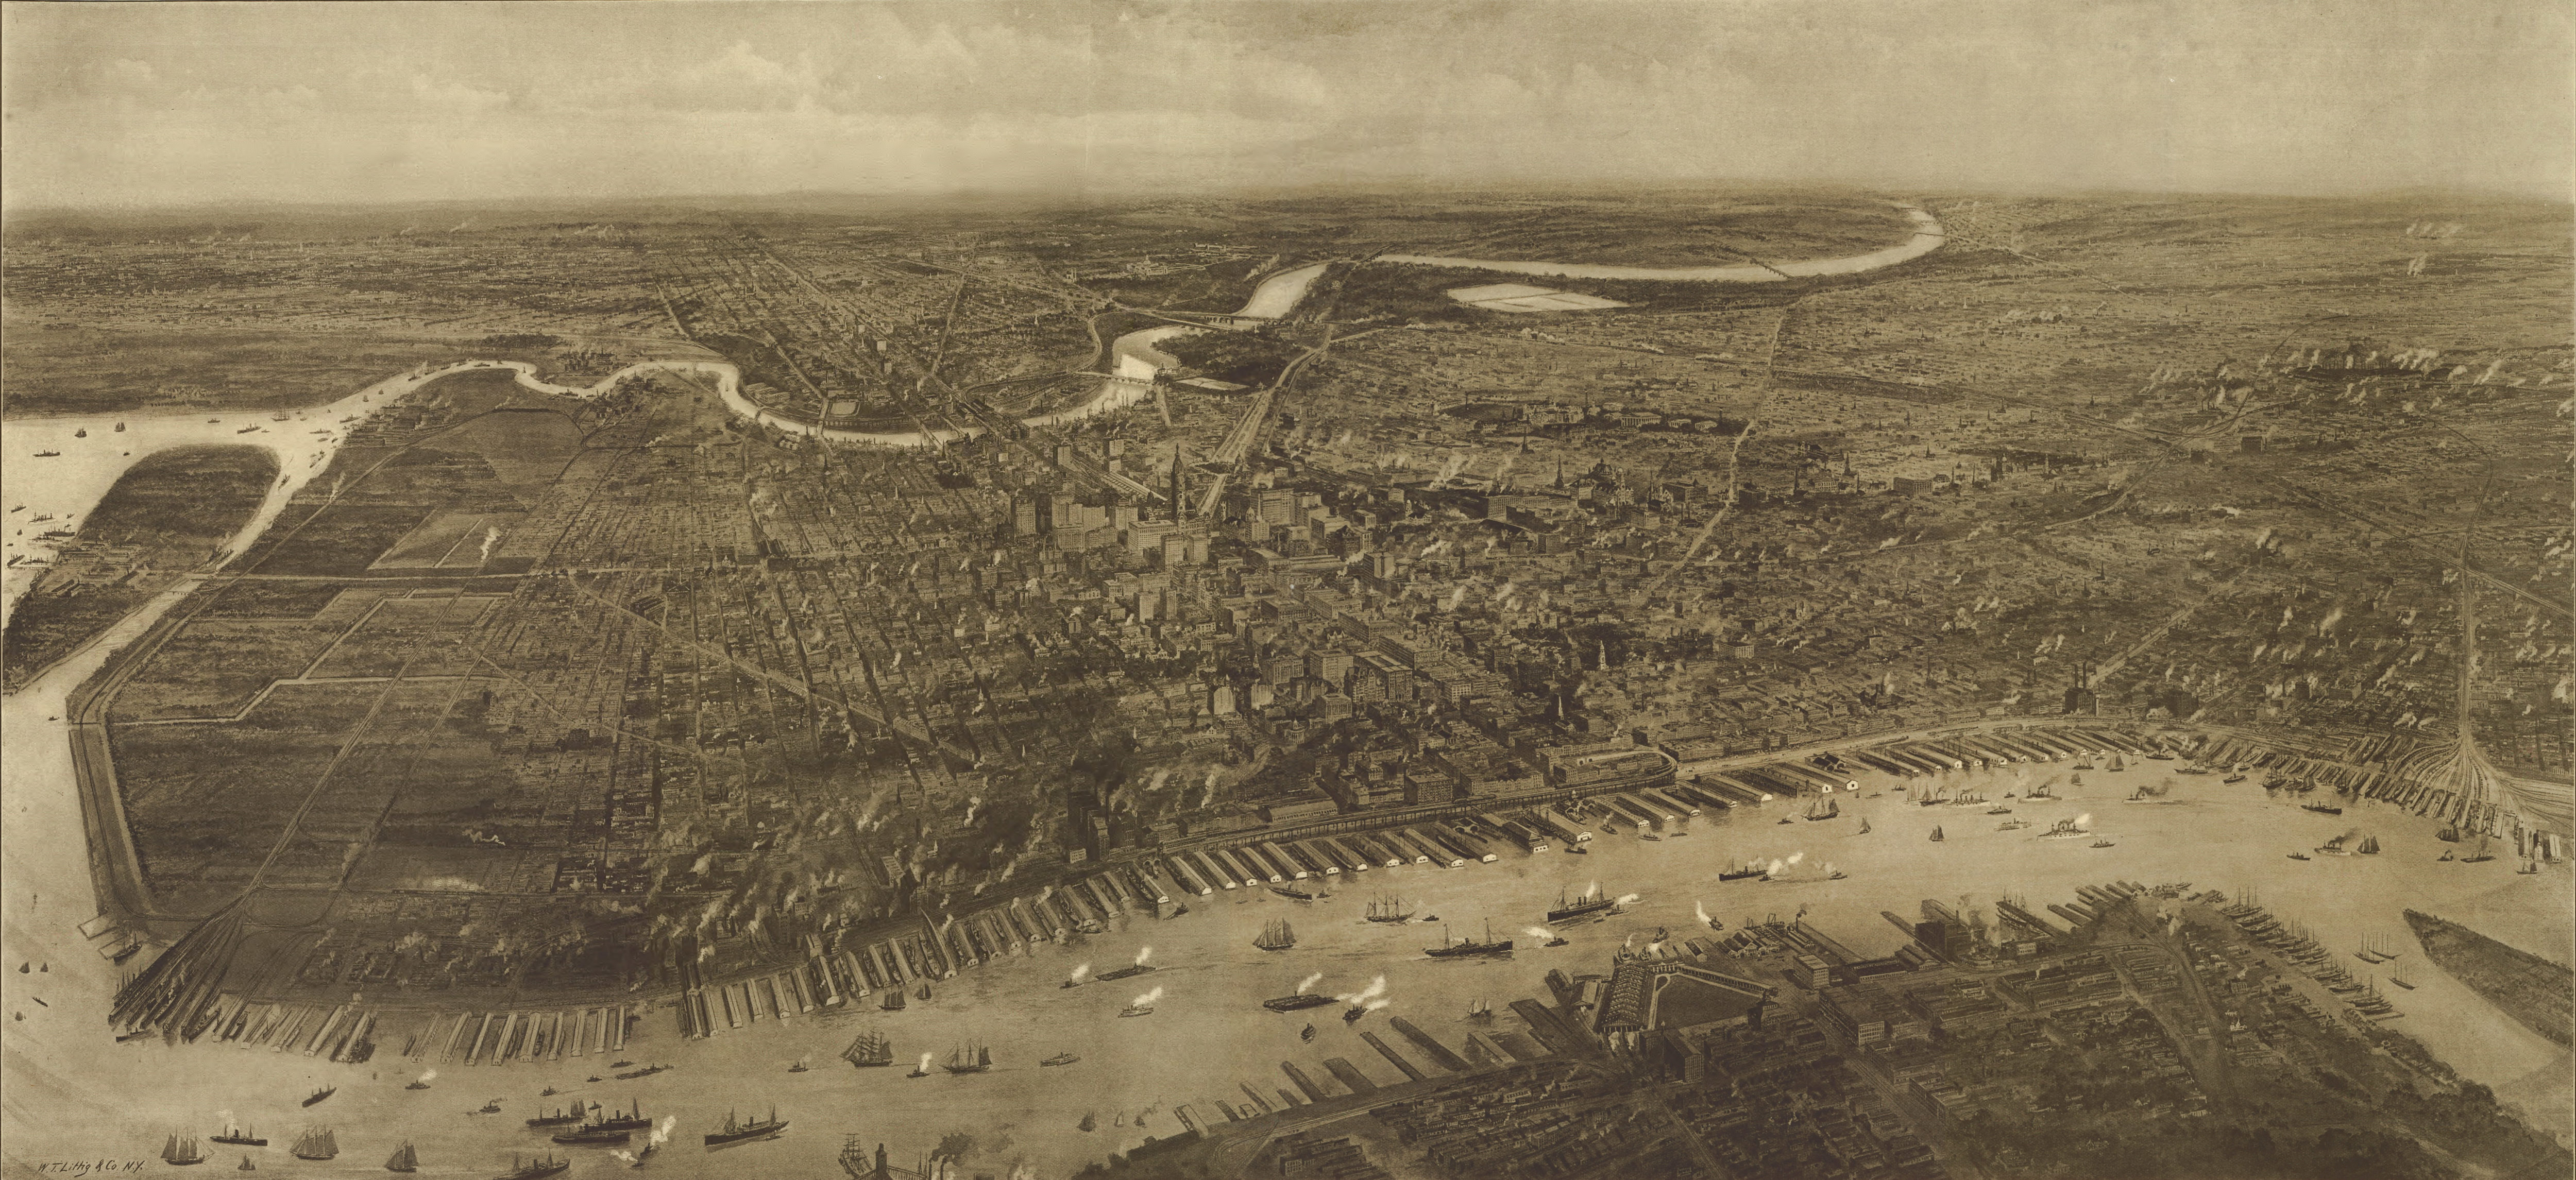 A 1908 drawing of Philadelphia from over New Jersey, looking out across the Delaware showing buildings, roads, and less developed land around the outskirts of the city, ships and docks along the Delaware, and the Schuylkill River winding in the distance.